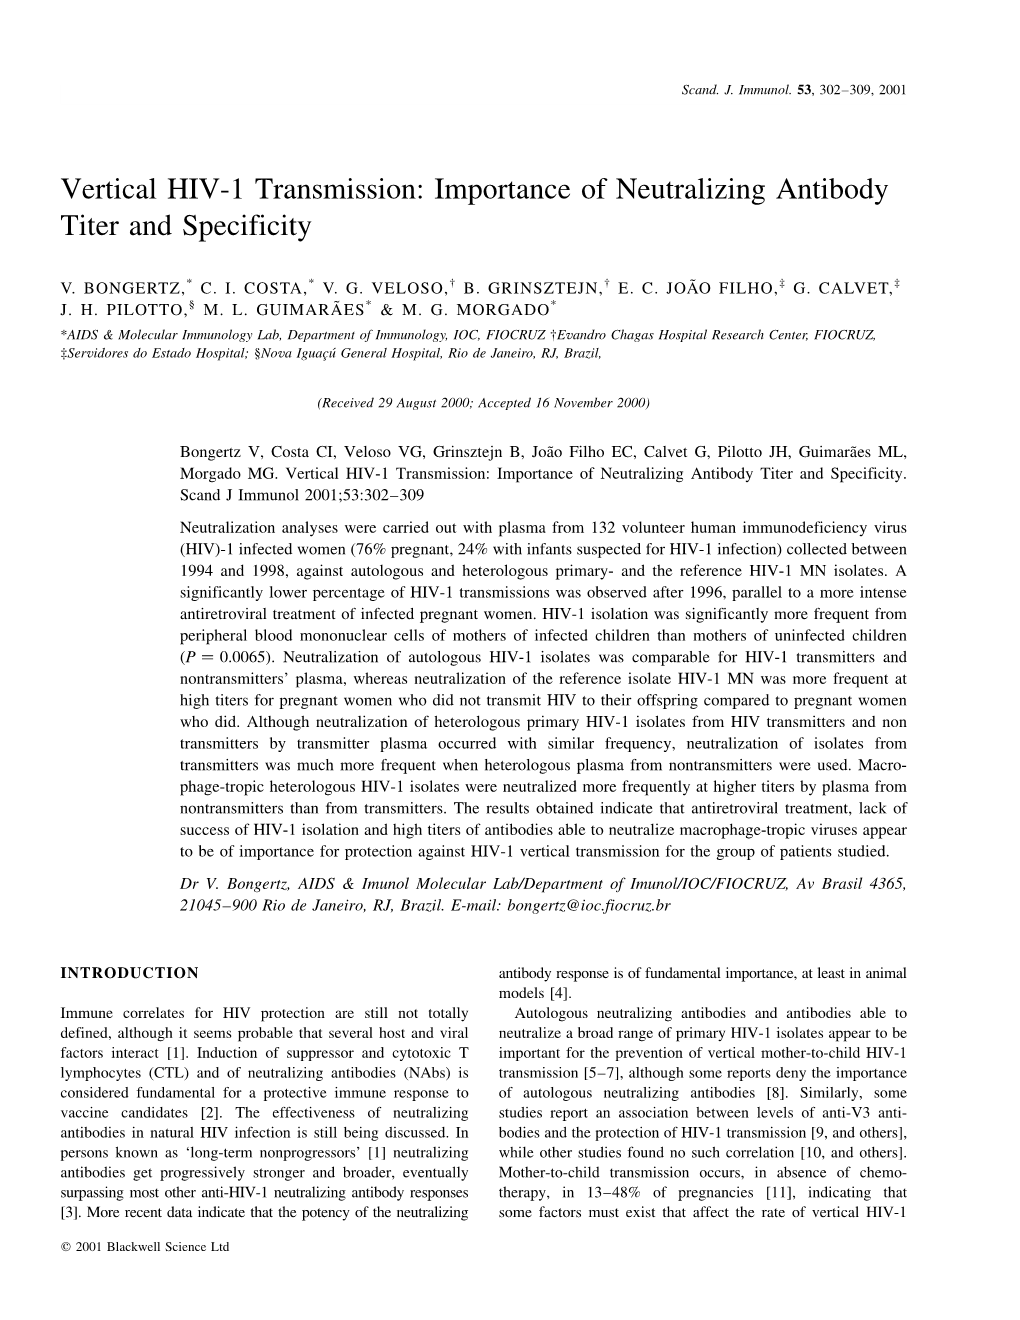 Vertical HIV-1 Transmission: Importance of Neutralizing Antibody Titer and Specificity